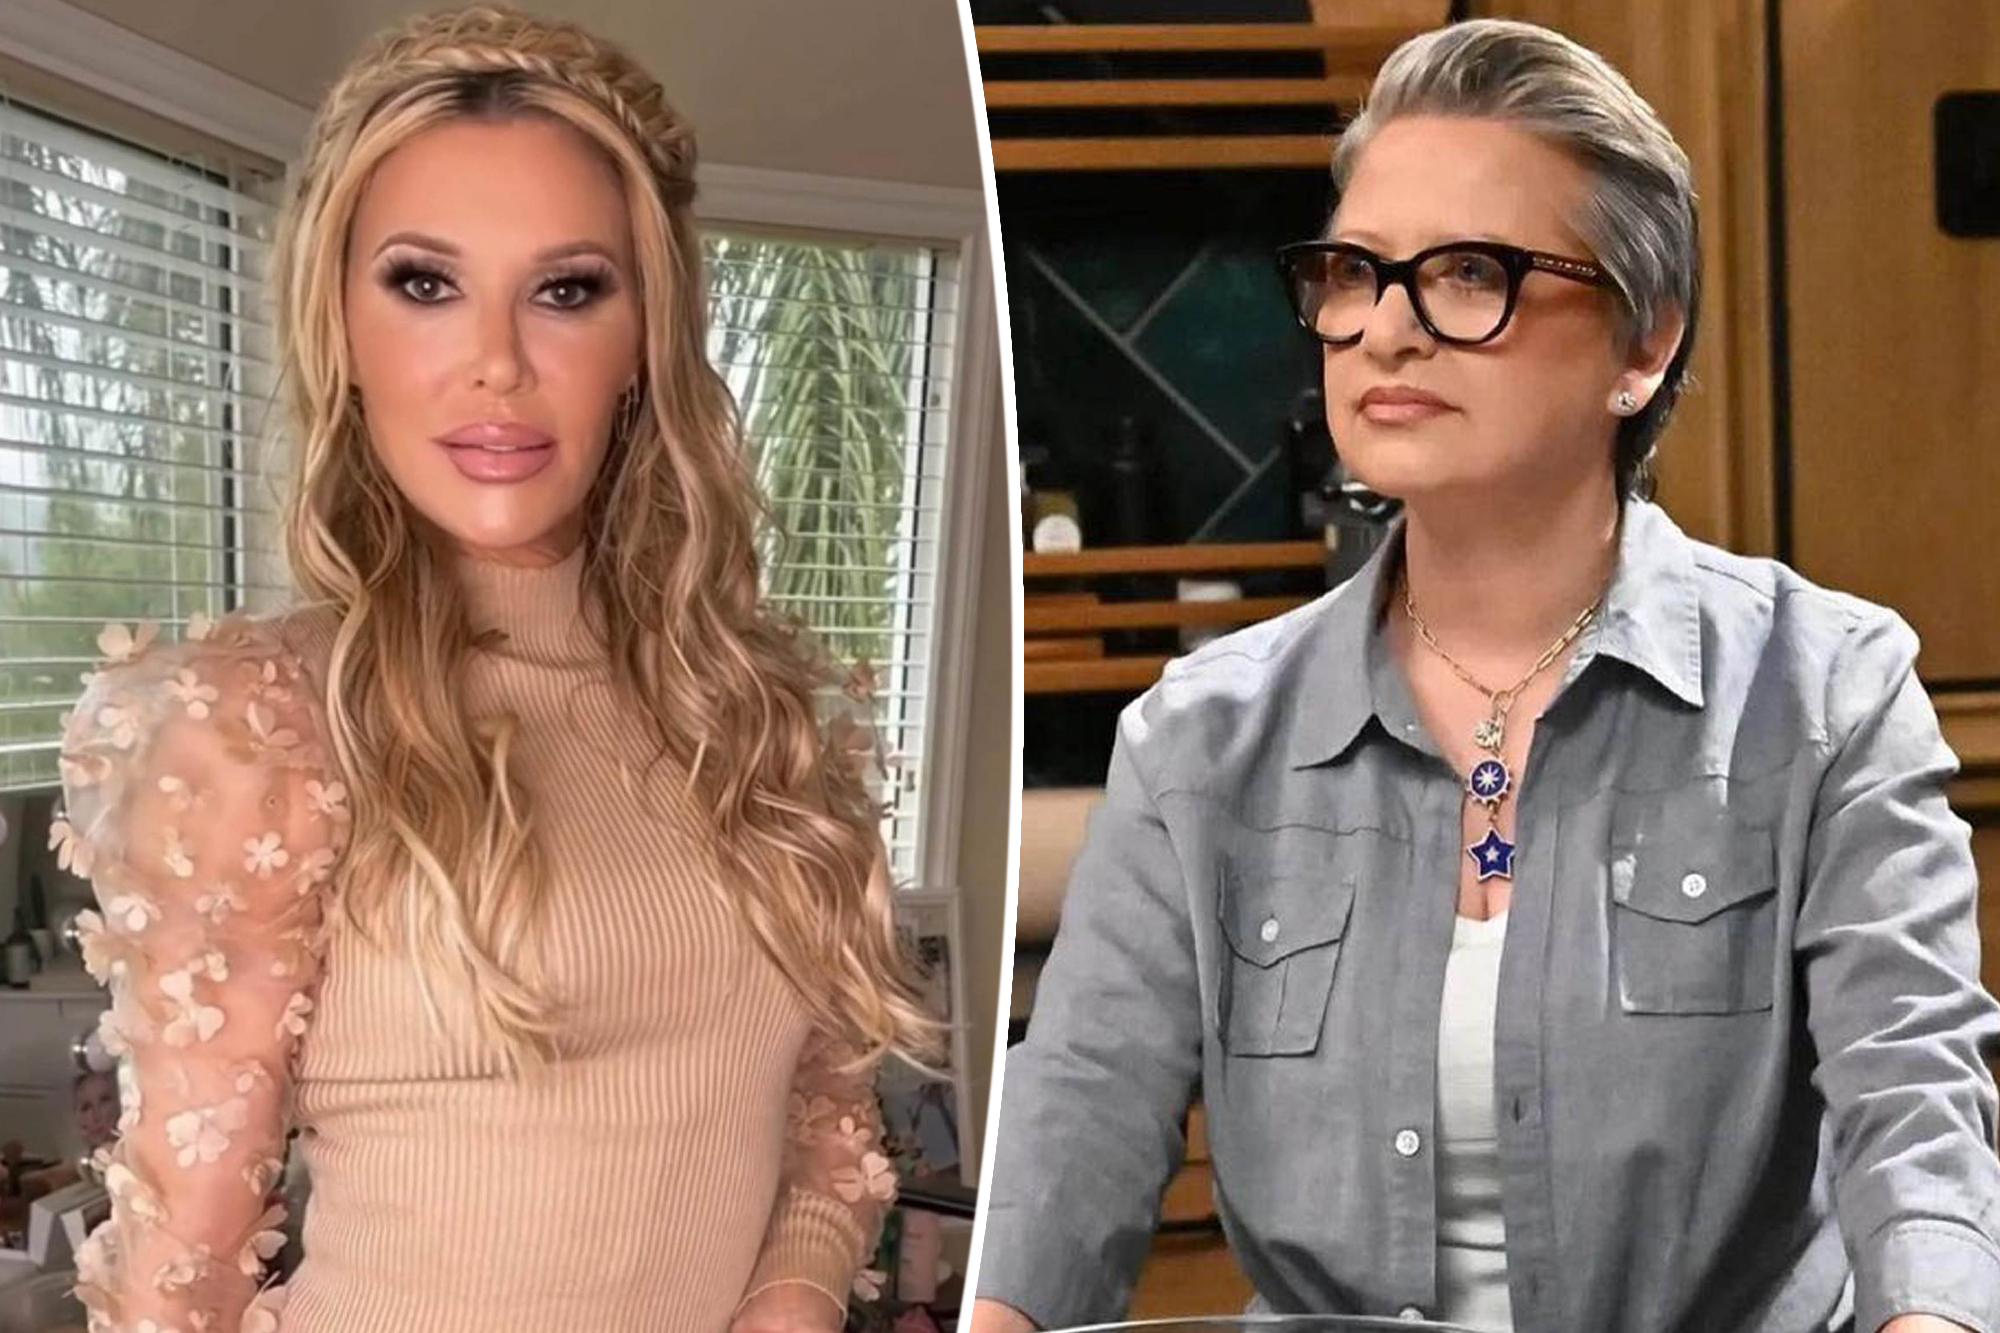 Caroline Manzo Sues Bravo Claims Brandi Glanville Humped Her Forced Tongue Into Mouth While